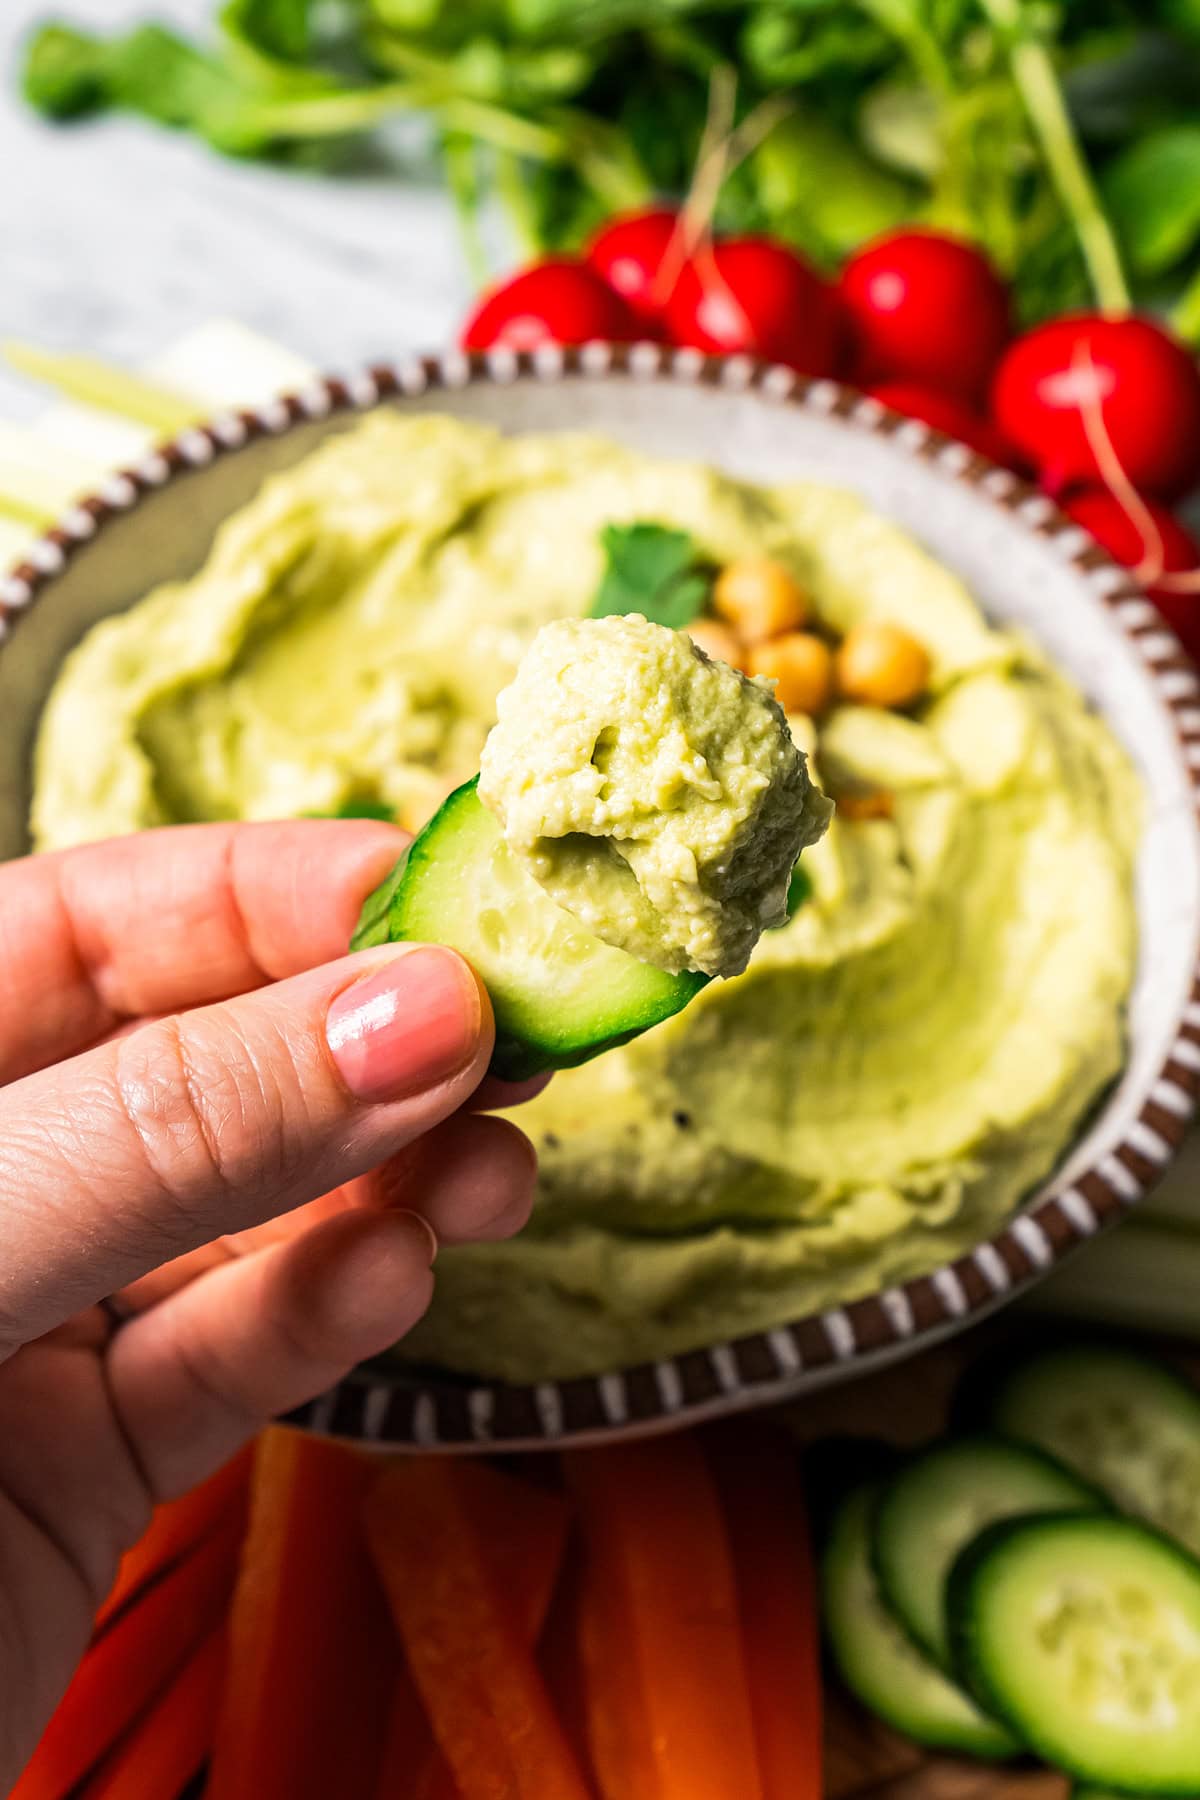 Dipping into a hummus with a slice of cucumber.